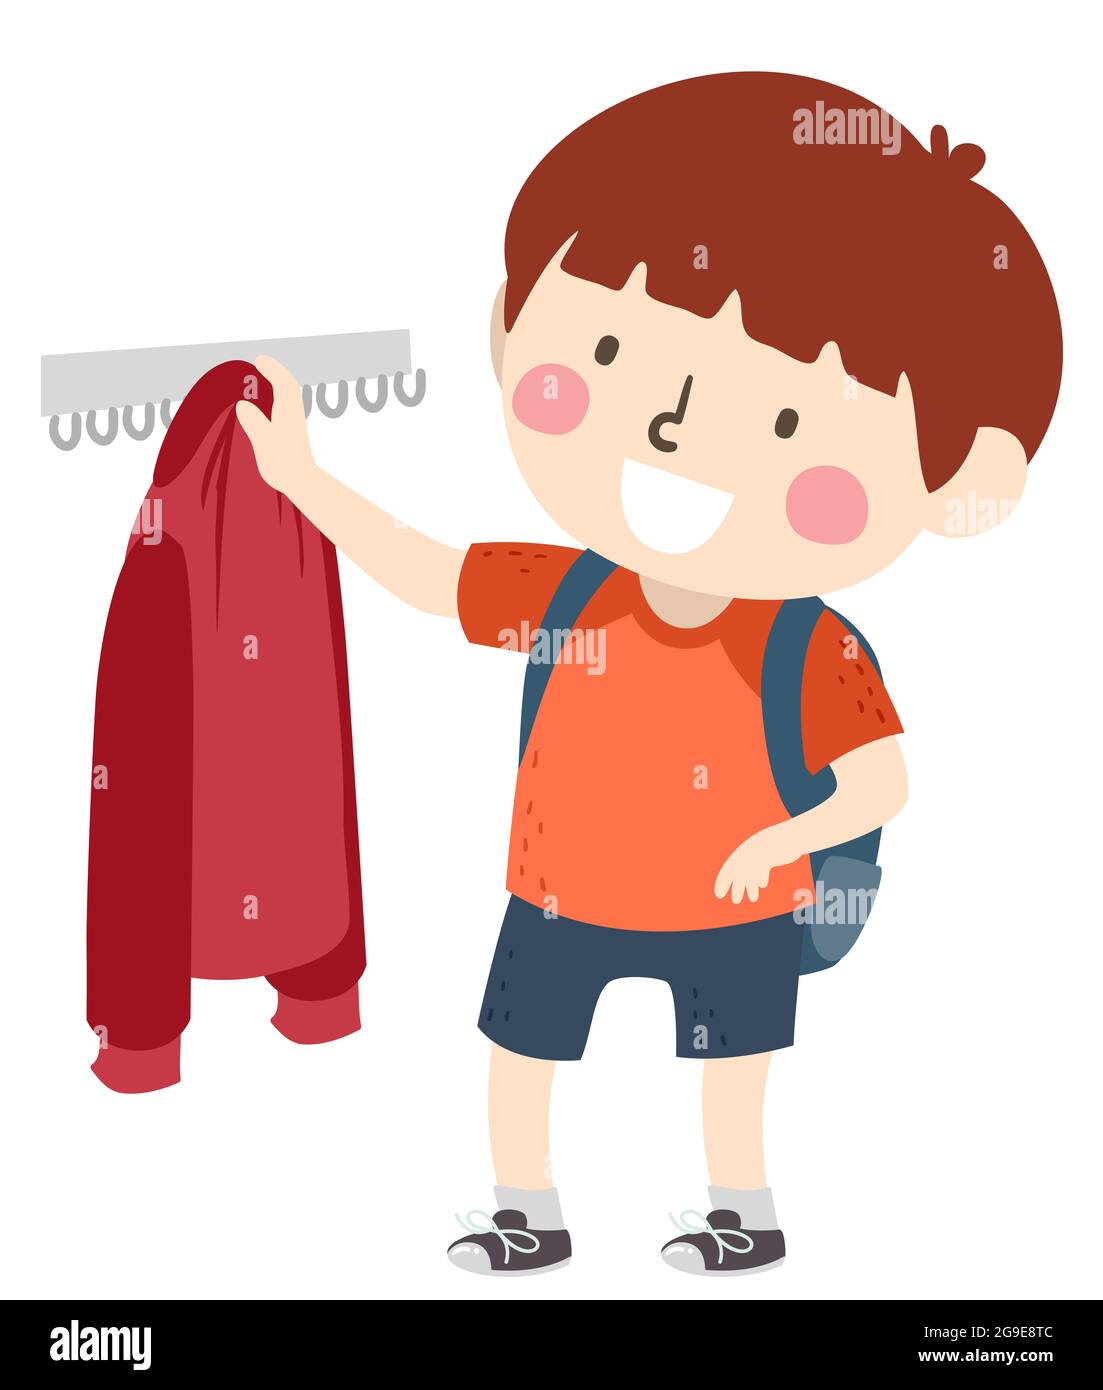 Illustration of a Kid Boy Hanging Jacket as Part of After School Routine Stock Photo